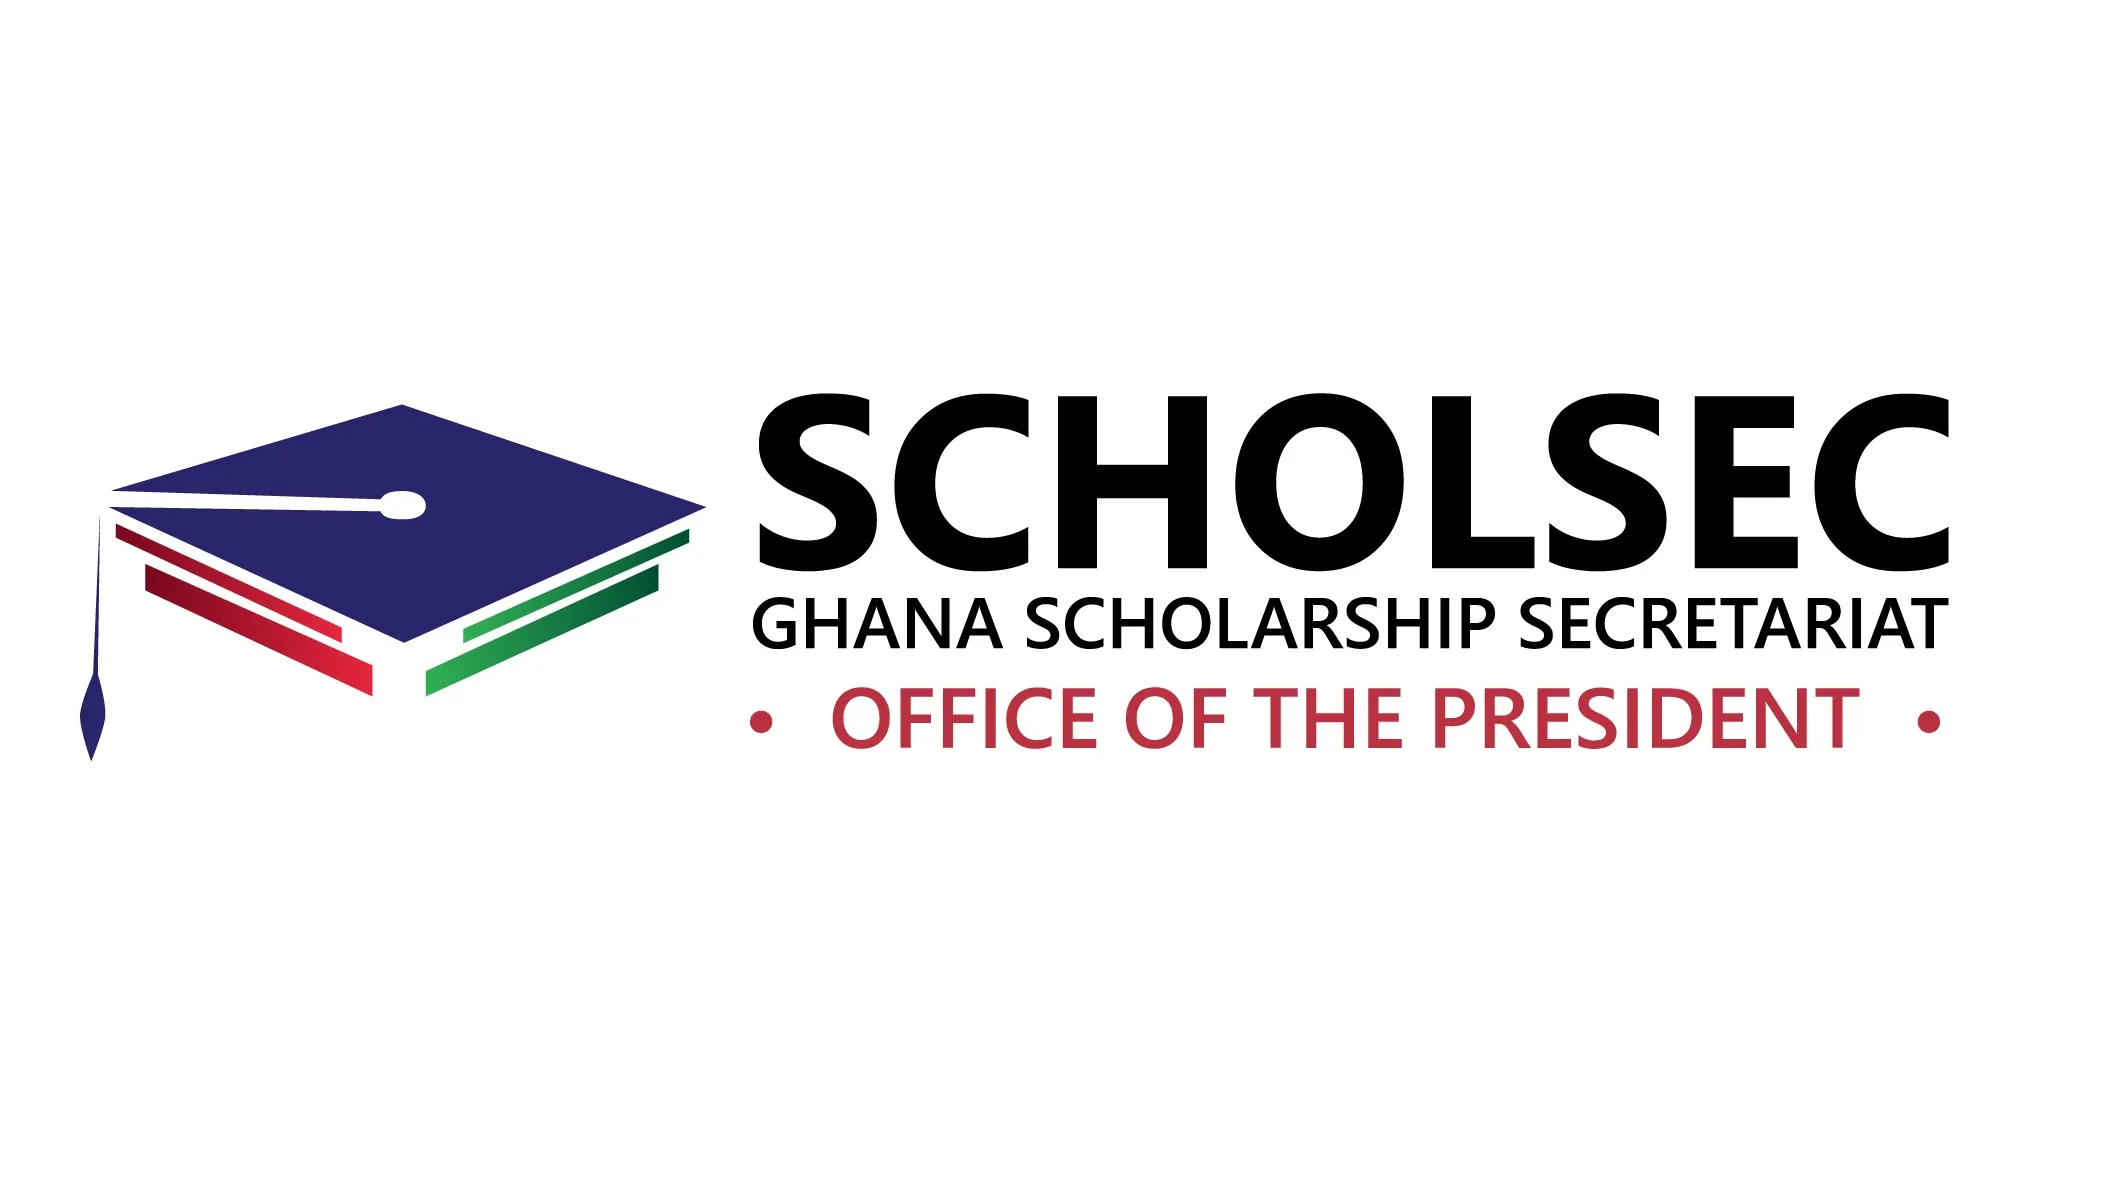 Breaking The Chains: Fighting Scholarship Injustice in Ghana